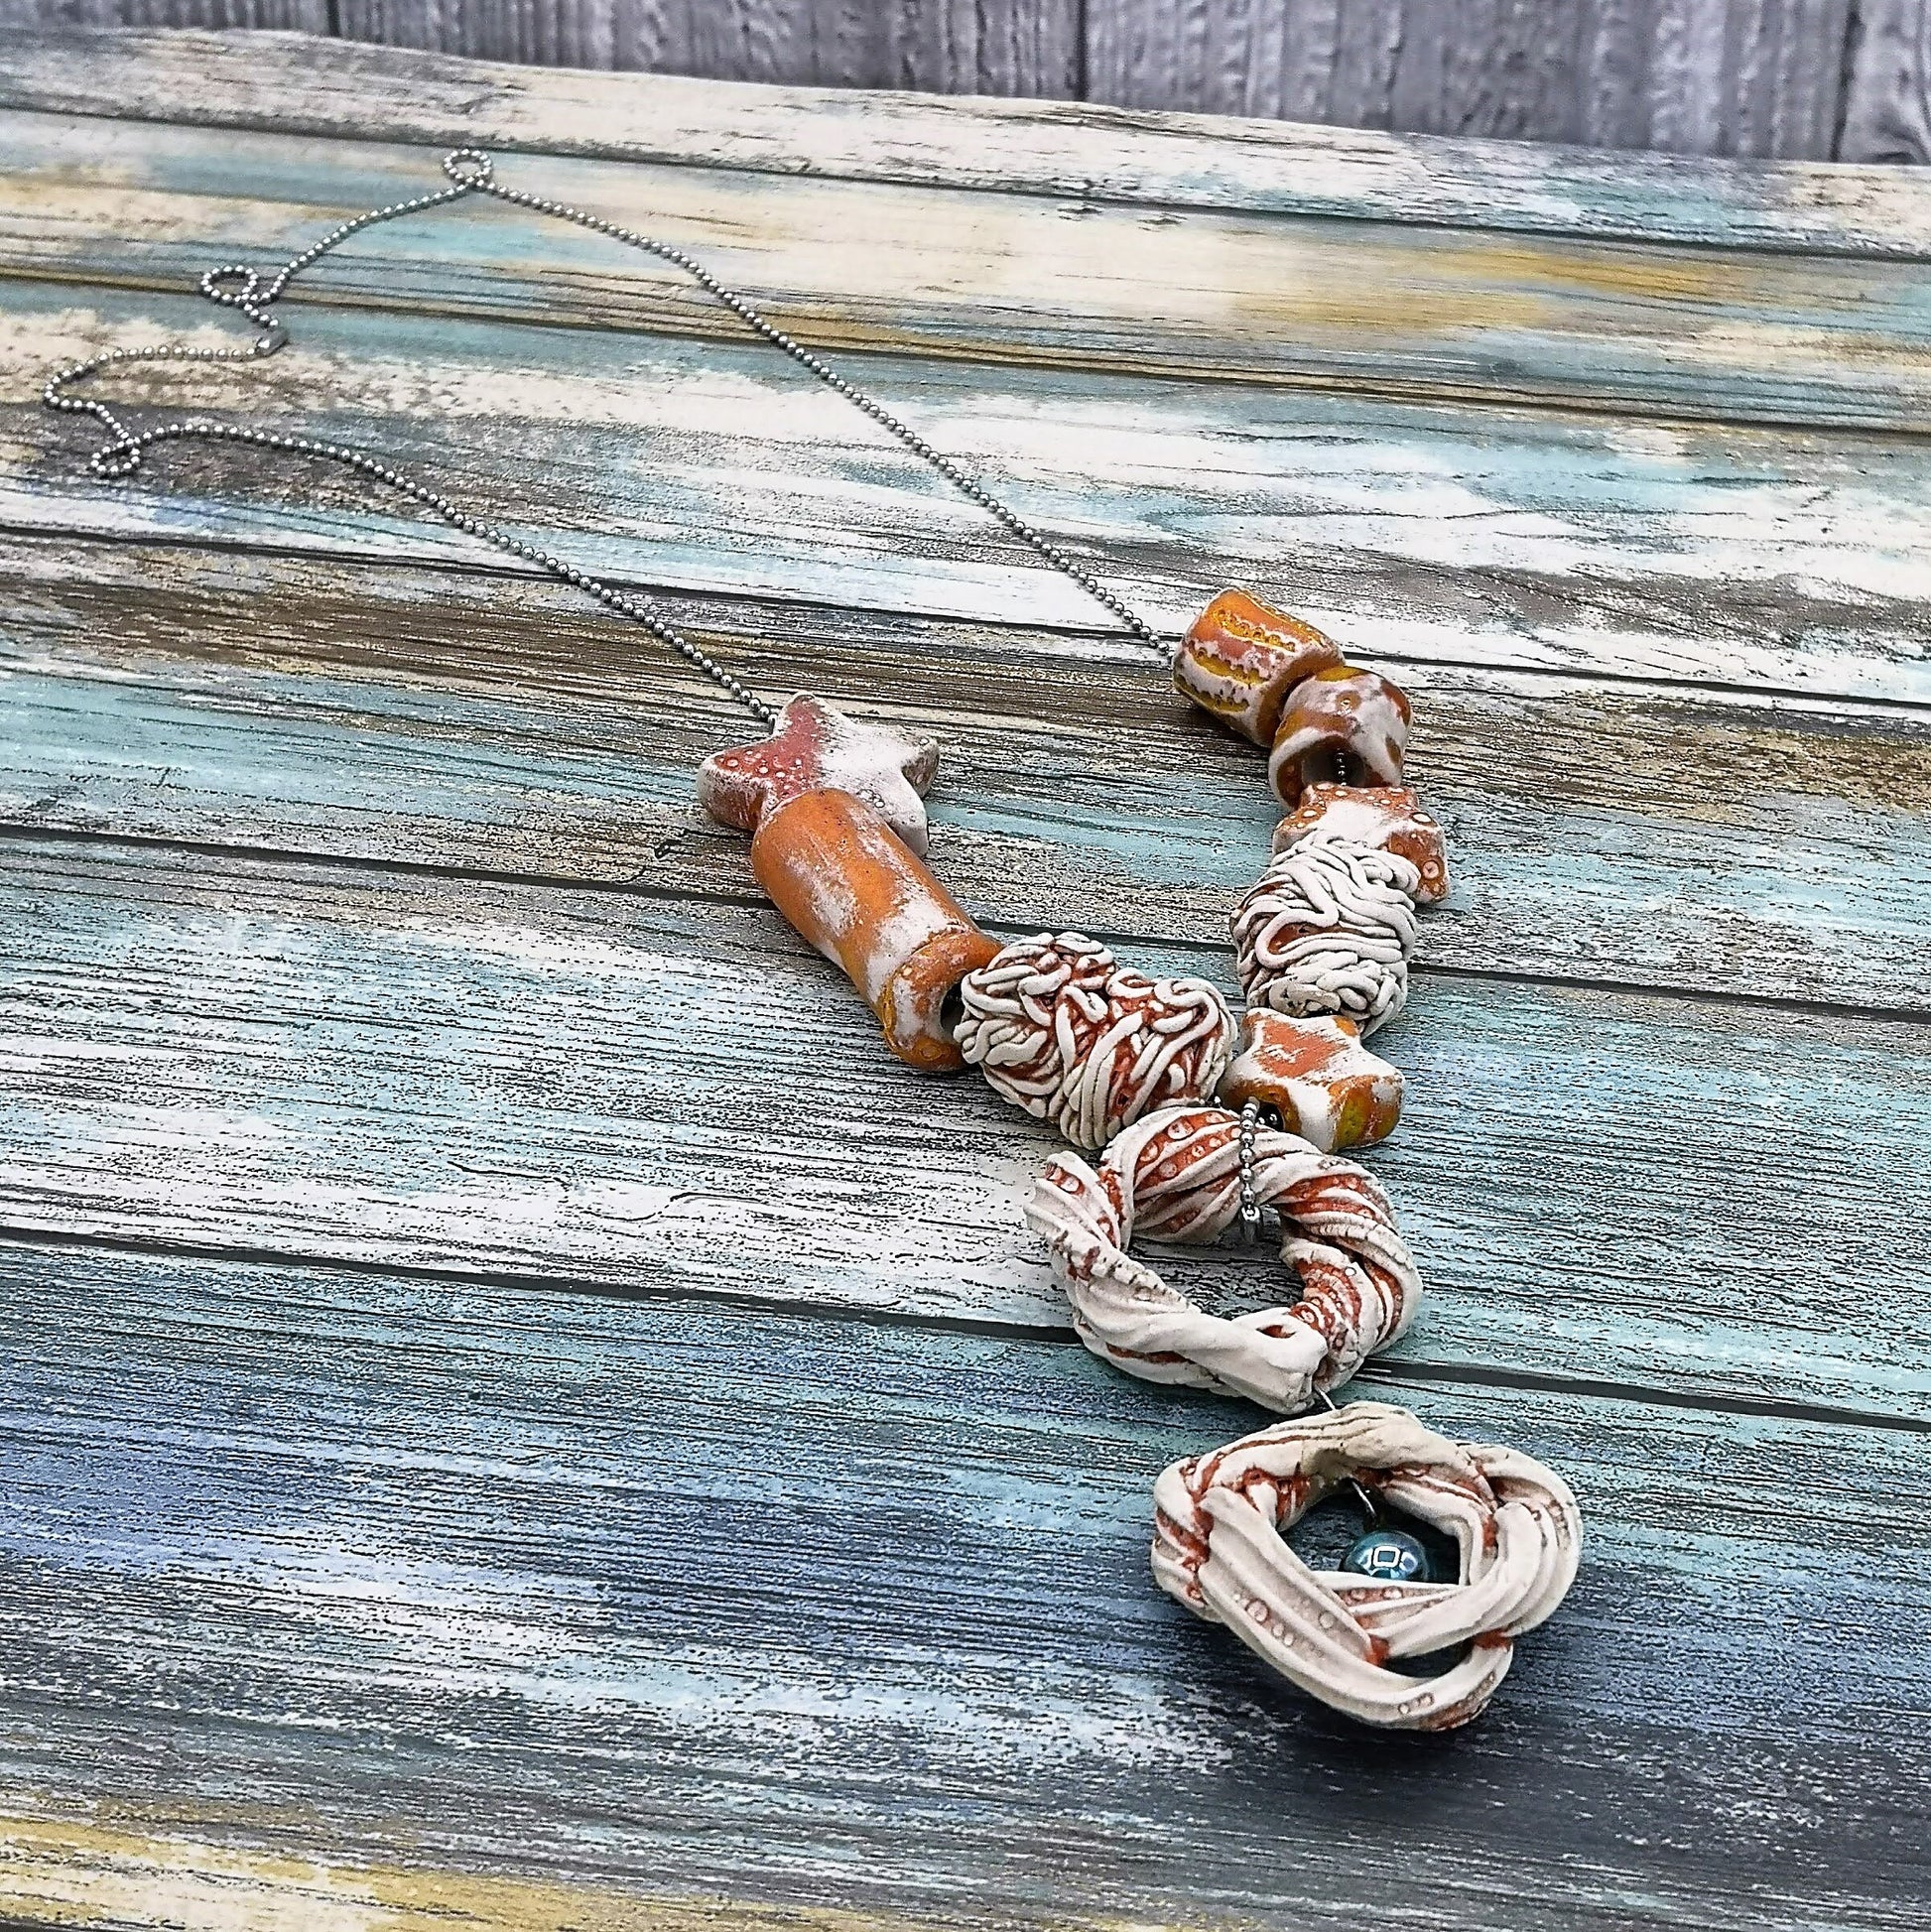 Handmade Ceramic Pendant Necklace, Chunky Beaded Necklace, Boho And Hippie Style Star Novelty Aesthetic Necklace For Womens, Weird Jewelry - Ceramica Ana Rafael